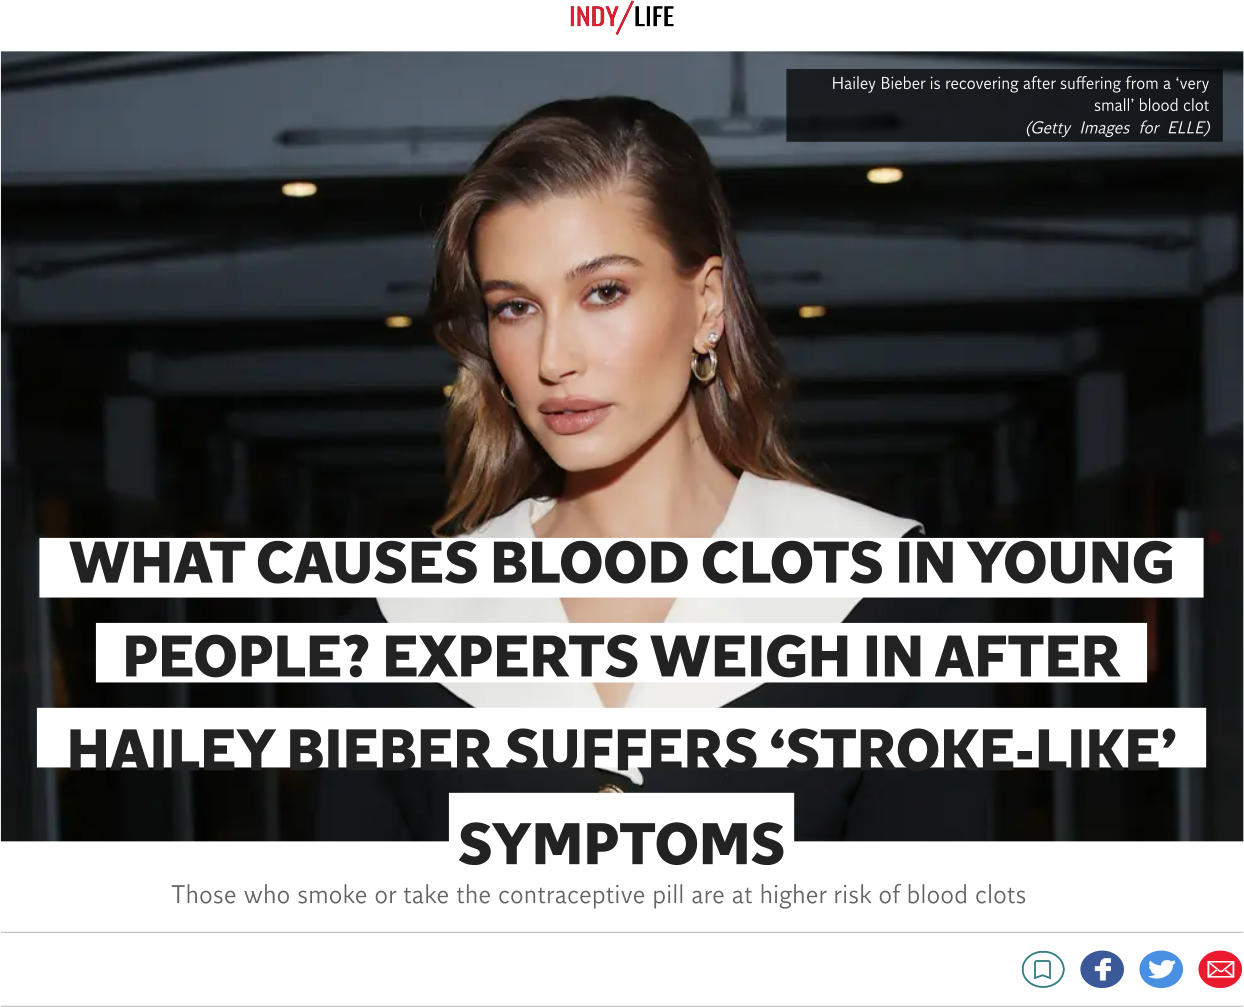 Those who smoke or take the contraceptive pill are at higher risk of blood clots Hailey Bieber is recovering after suffering from a ‘very small’ blood clot (Getty Images for ELLE) WHAT CAUSES BLOOD CLOTS IN YOUNG PEOPLE? EXPERTS WEIGH IN AFTER HAILEY BIEBER SUFFERS ‘STROKE-LIKE’ SYMPTOMS